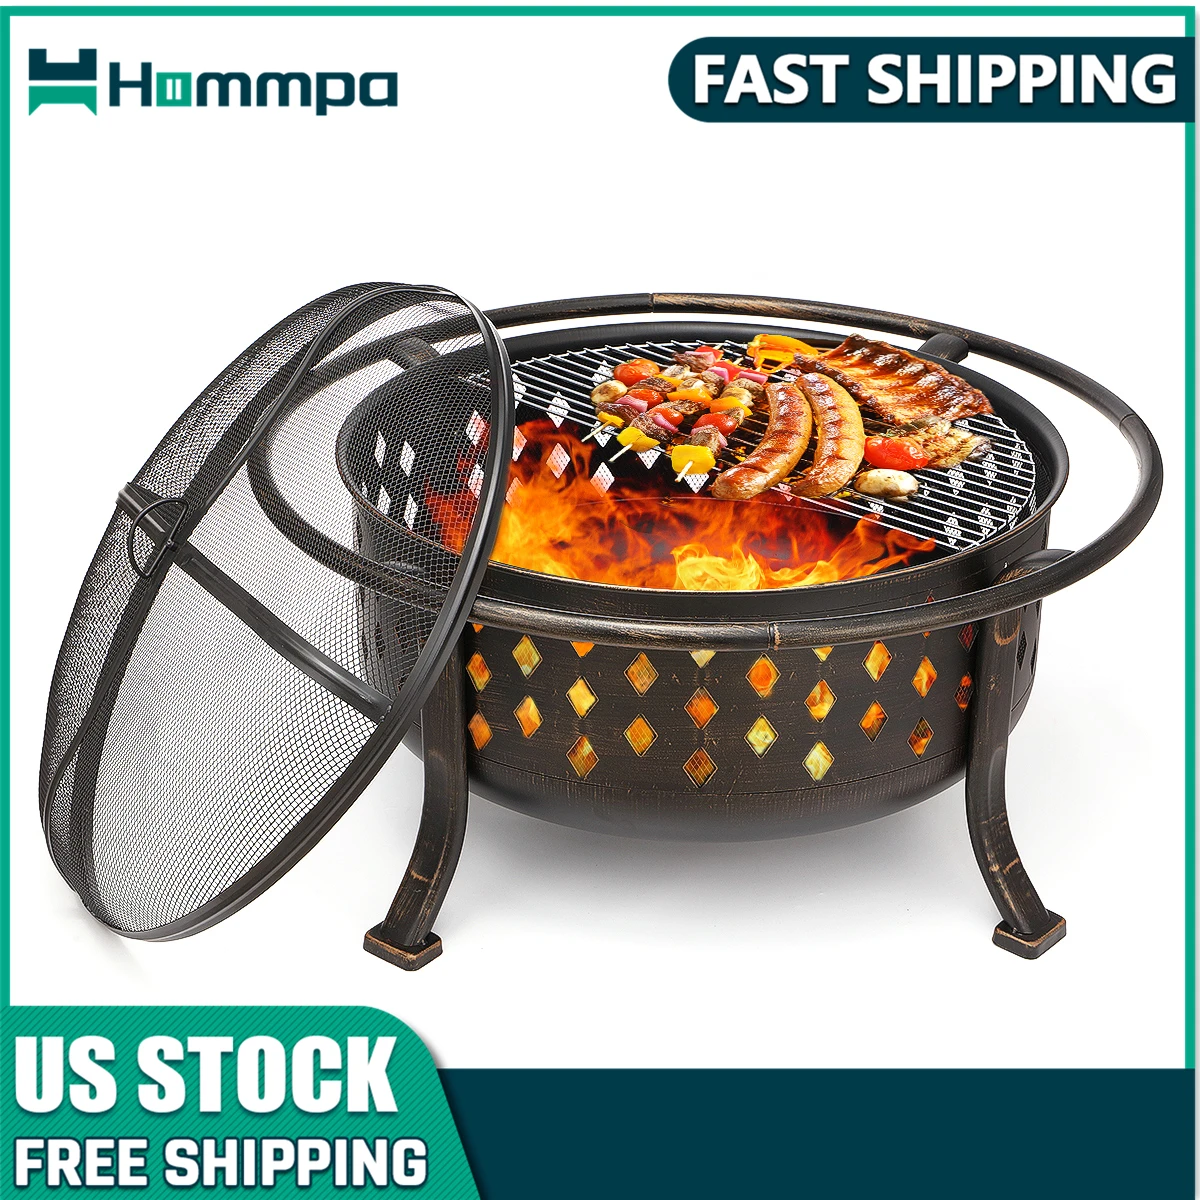 

36 inch Fire Pit Outdoor Wood Burning Fire Pits Heating Large Steel BBQ Grill Firepit Bowl for Winter with Cooking Grate